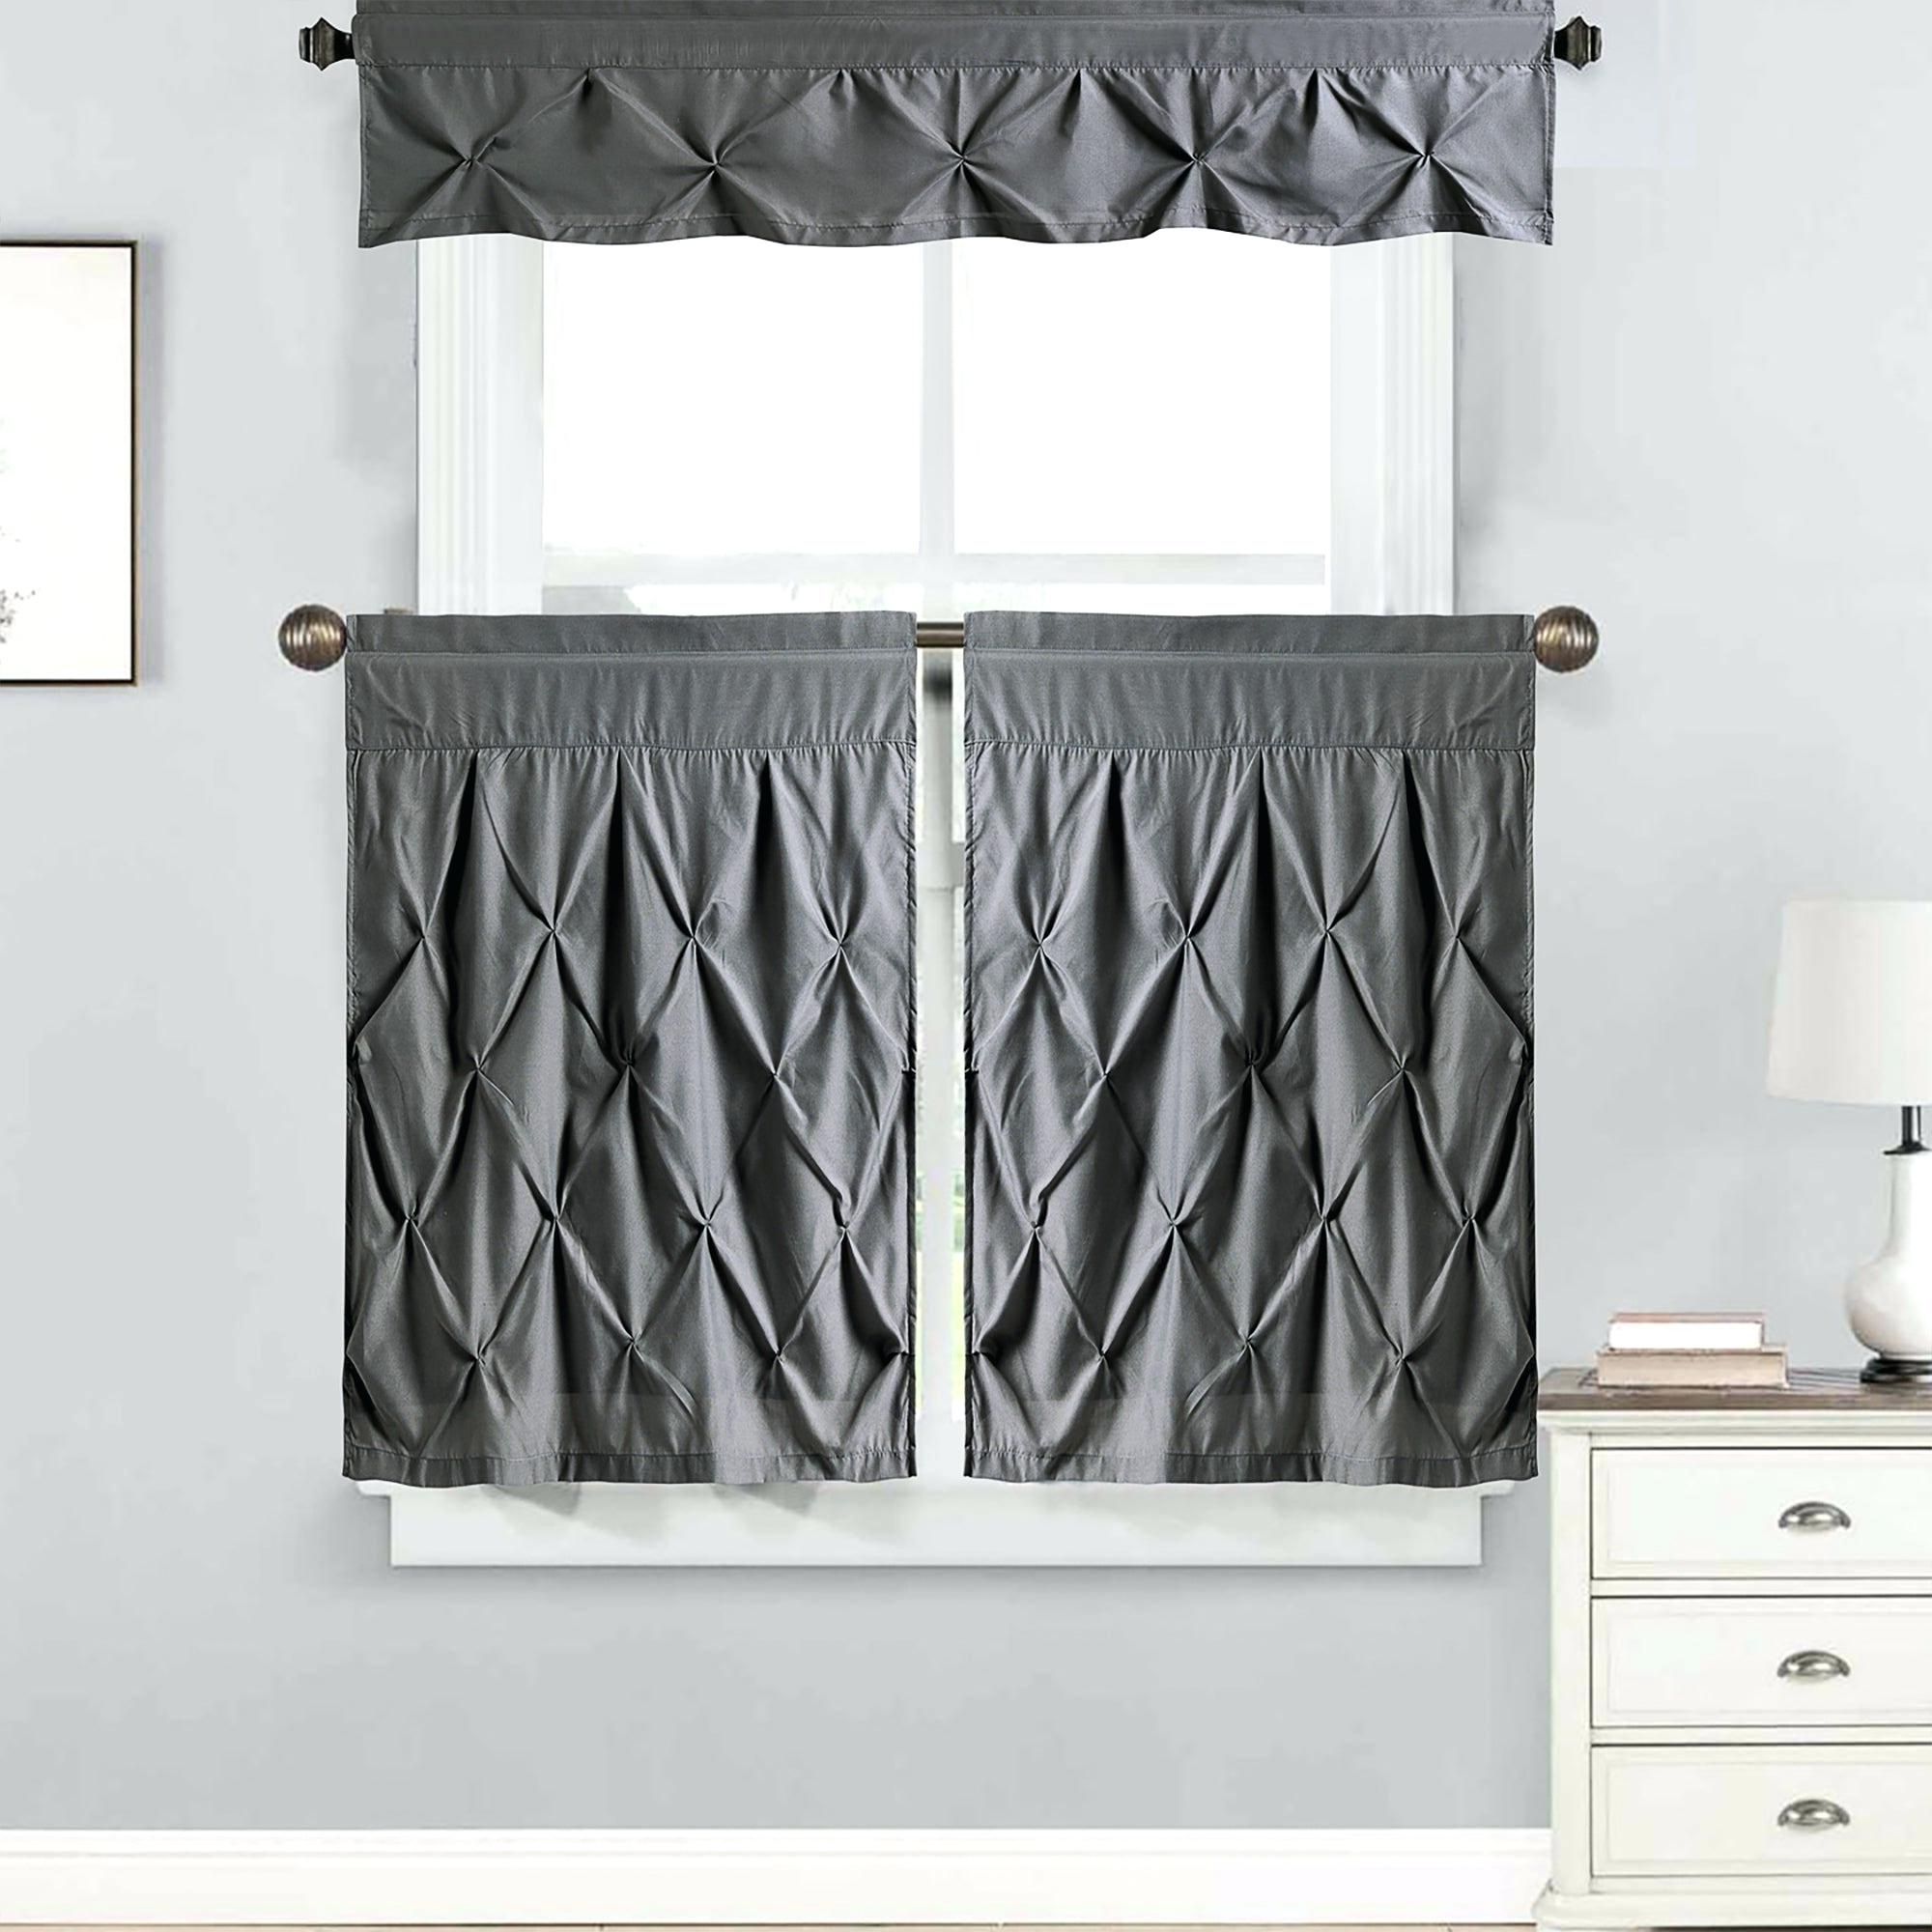 Most Up To Date Curtain Sets With Valance – Mnkskin In Chocolate 5 Piece Curtain Tier And Swag Sets (View 17 of 20)